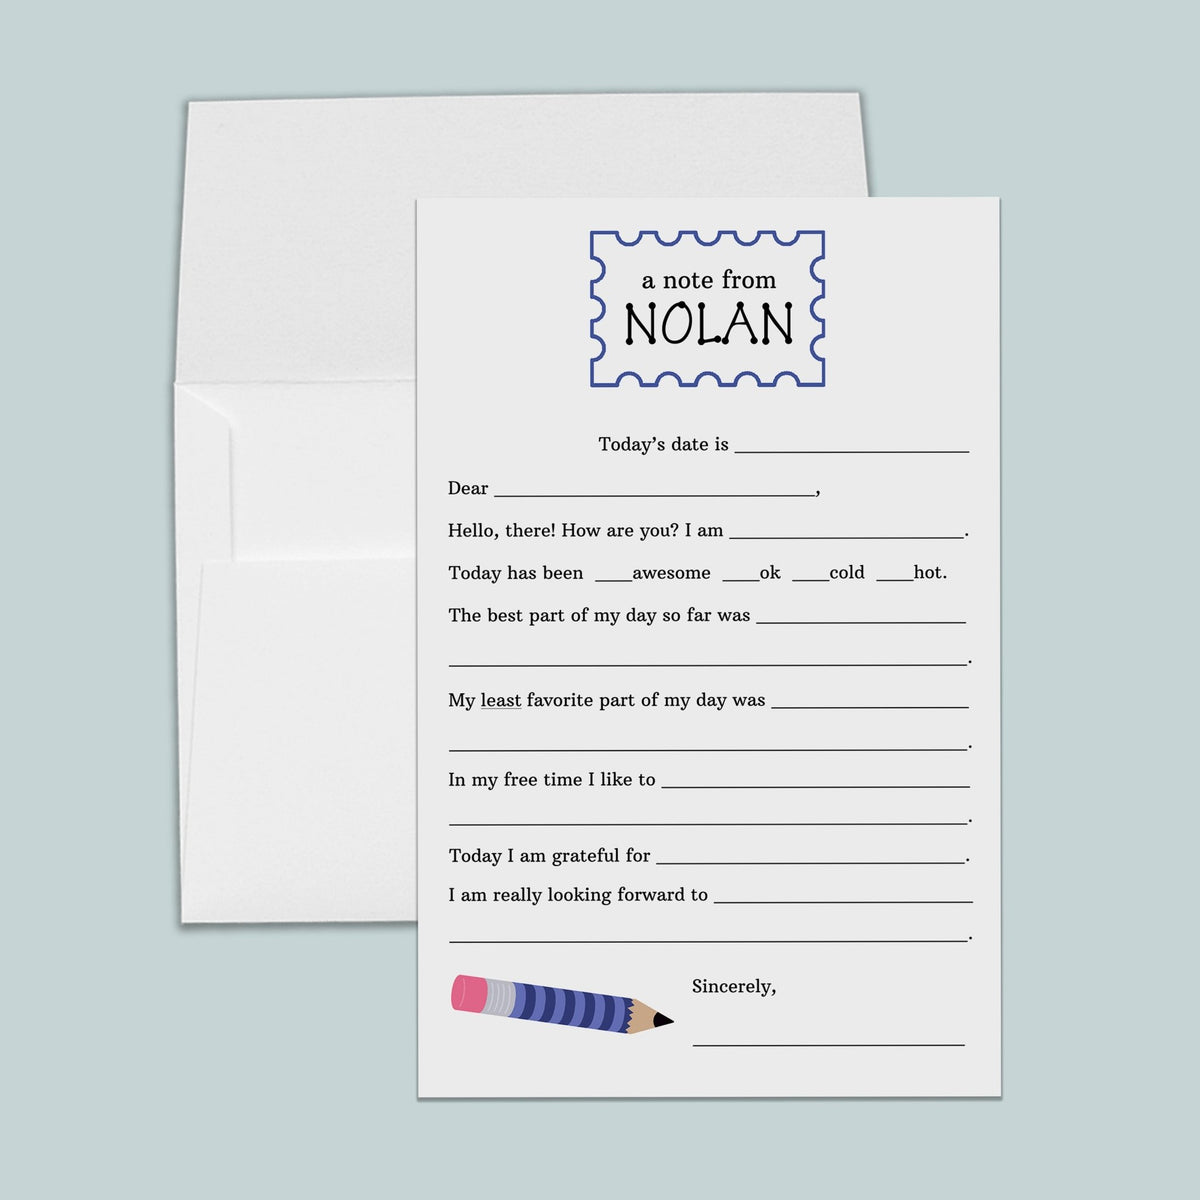 Blue Pencil - Personalized Fill-in Letter Template - The Note House